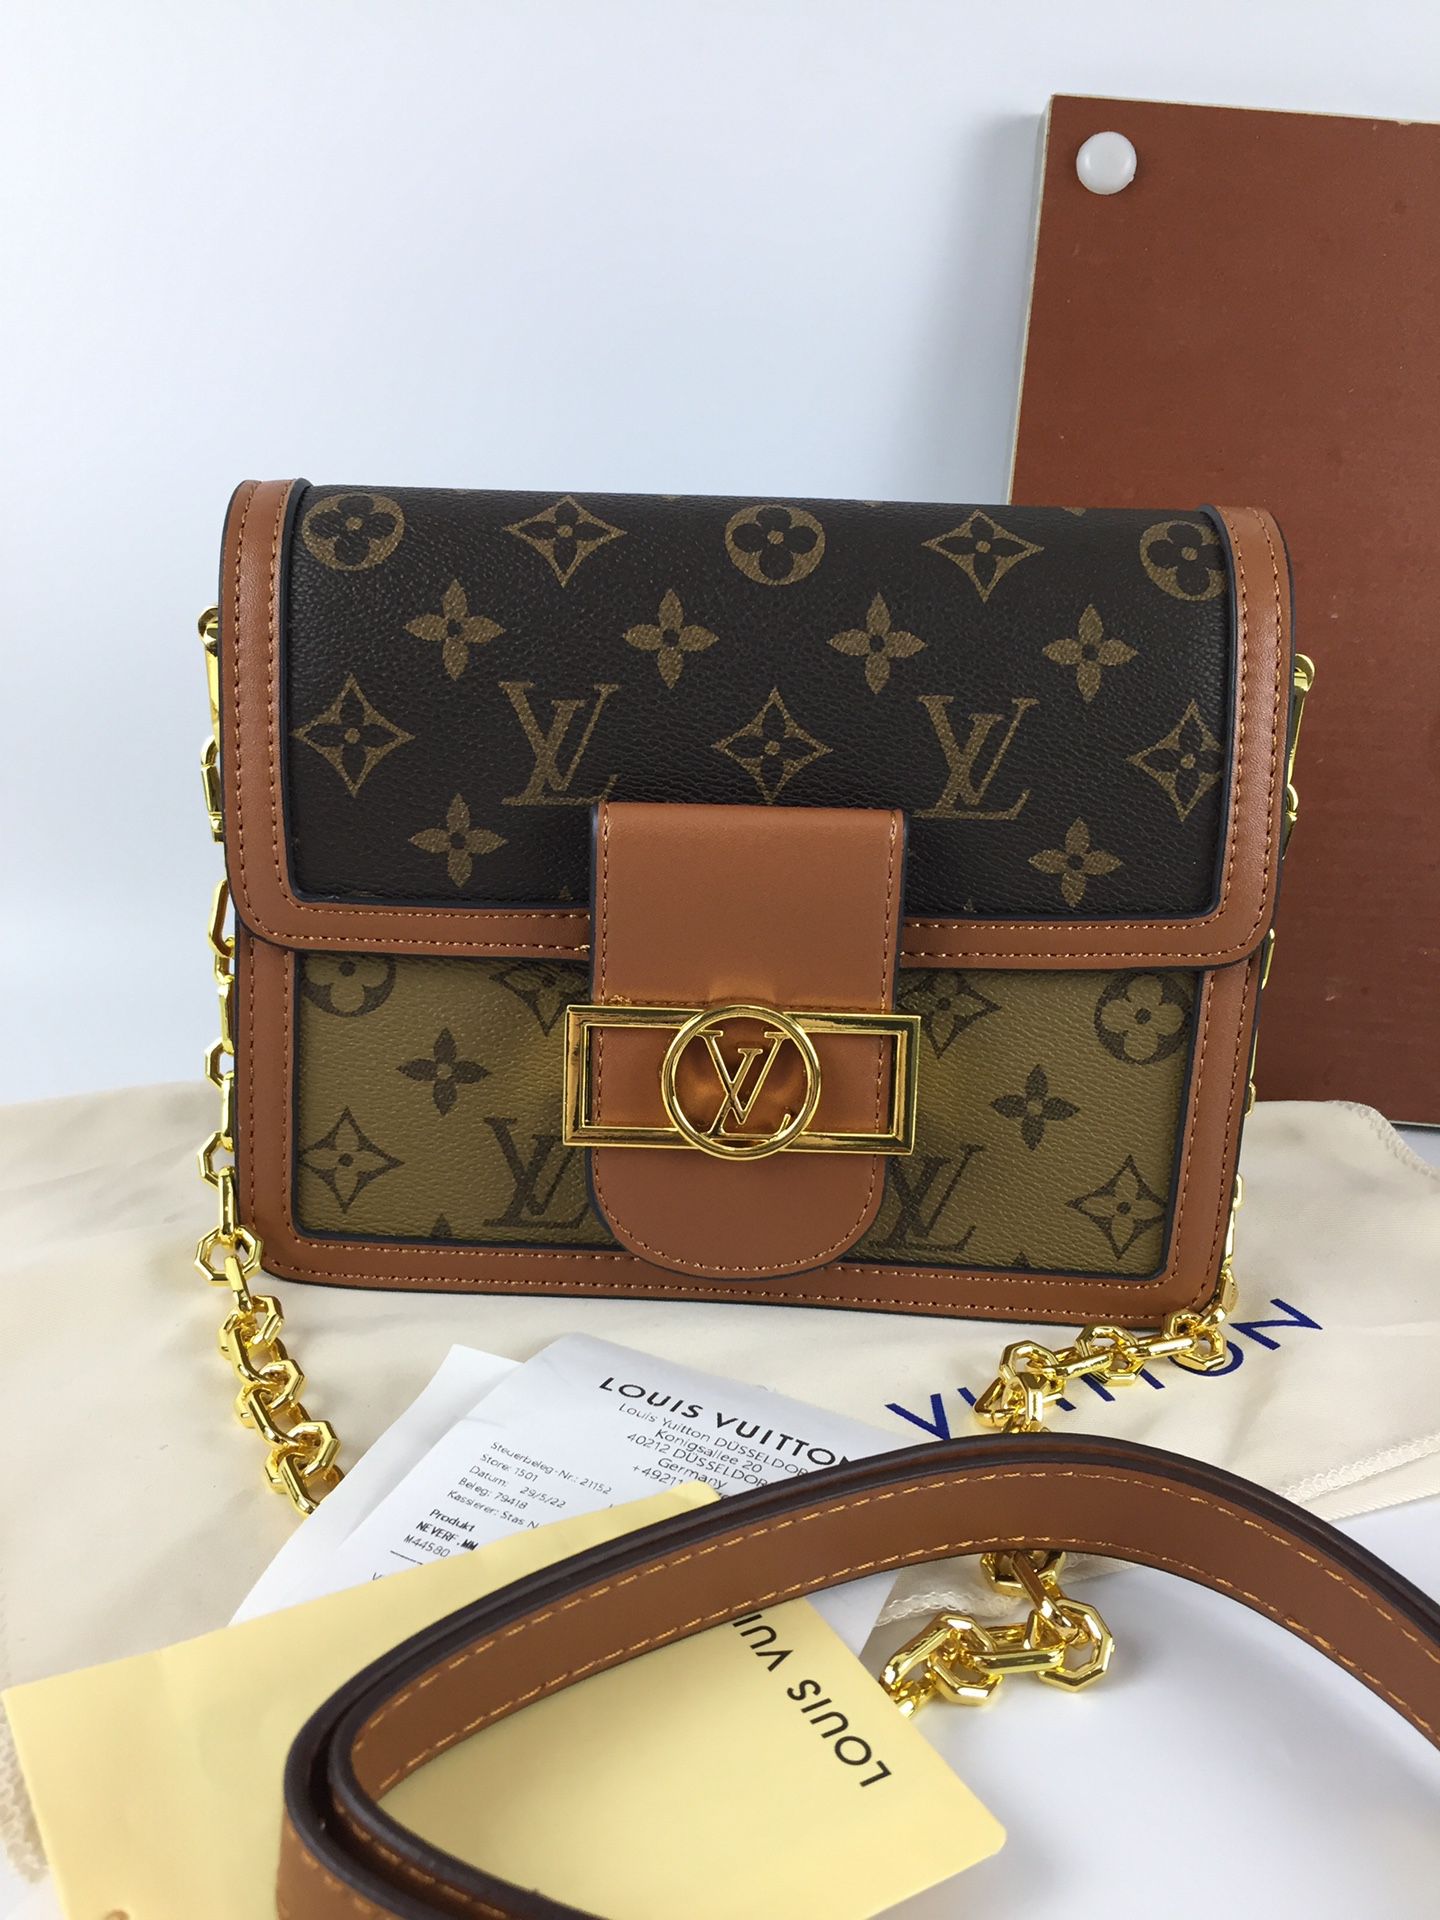 Louis Vuitton bag colorful old flower bag brown ladies bag crossbody for  Sale in Springfield, OH - OfferUp